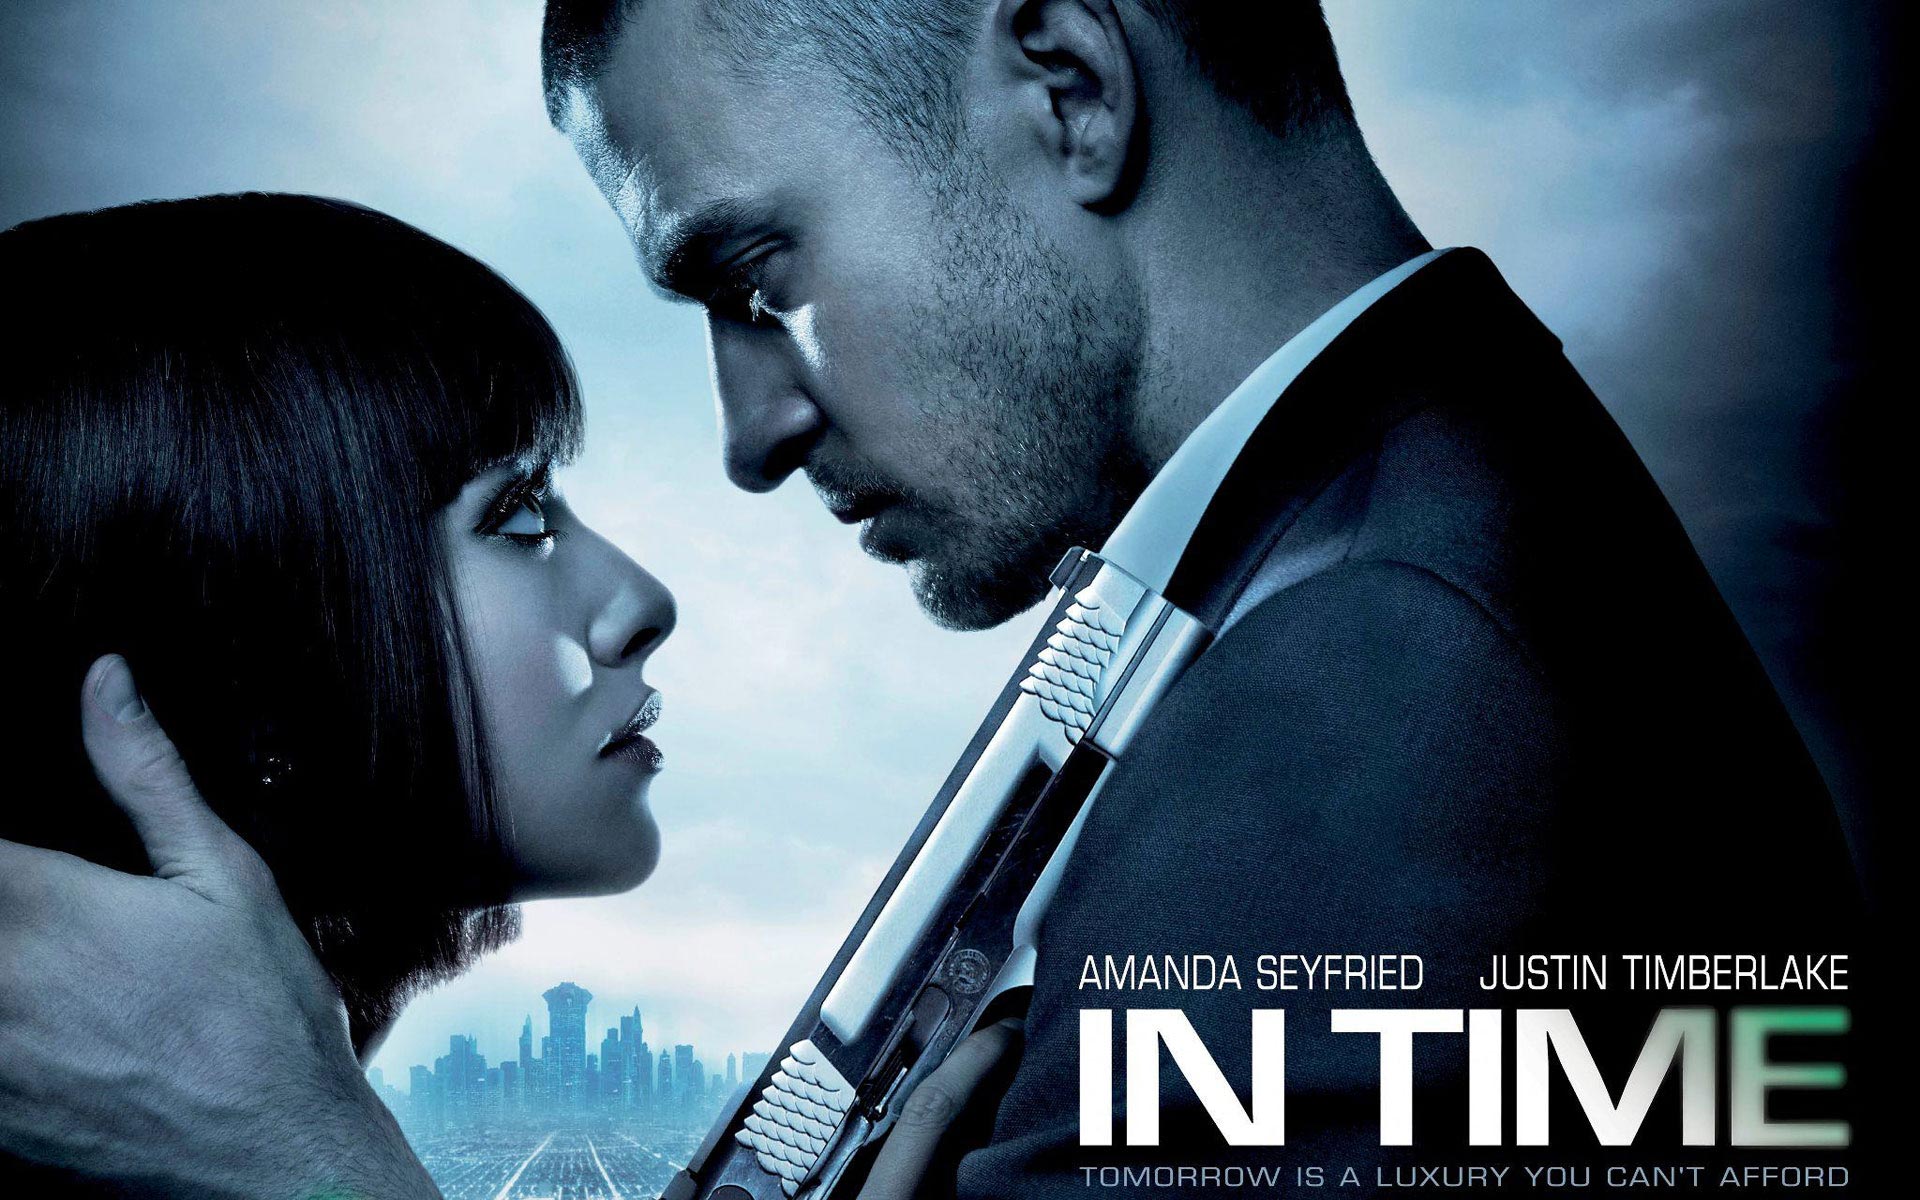 In Time now on Blu-ray and DVD Jan. 31st